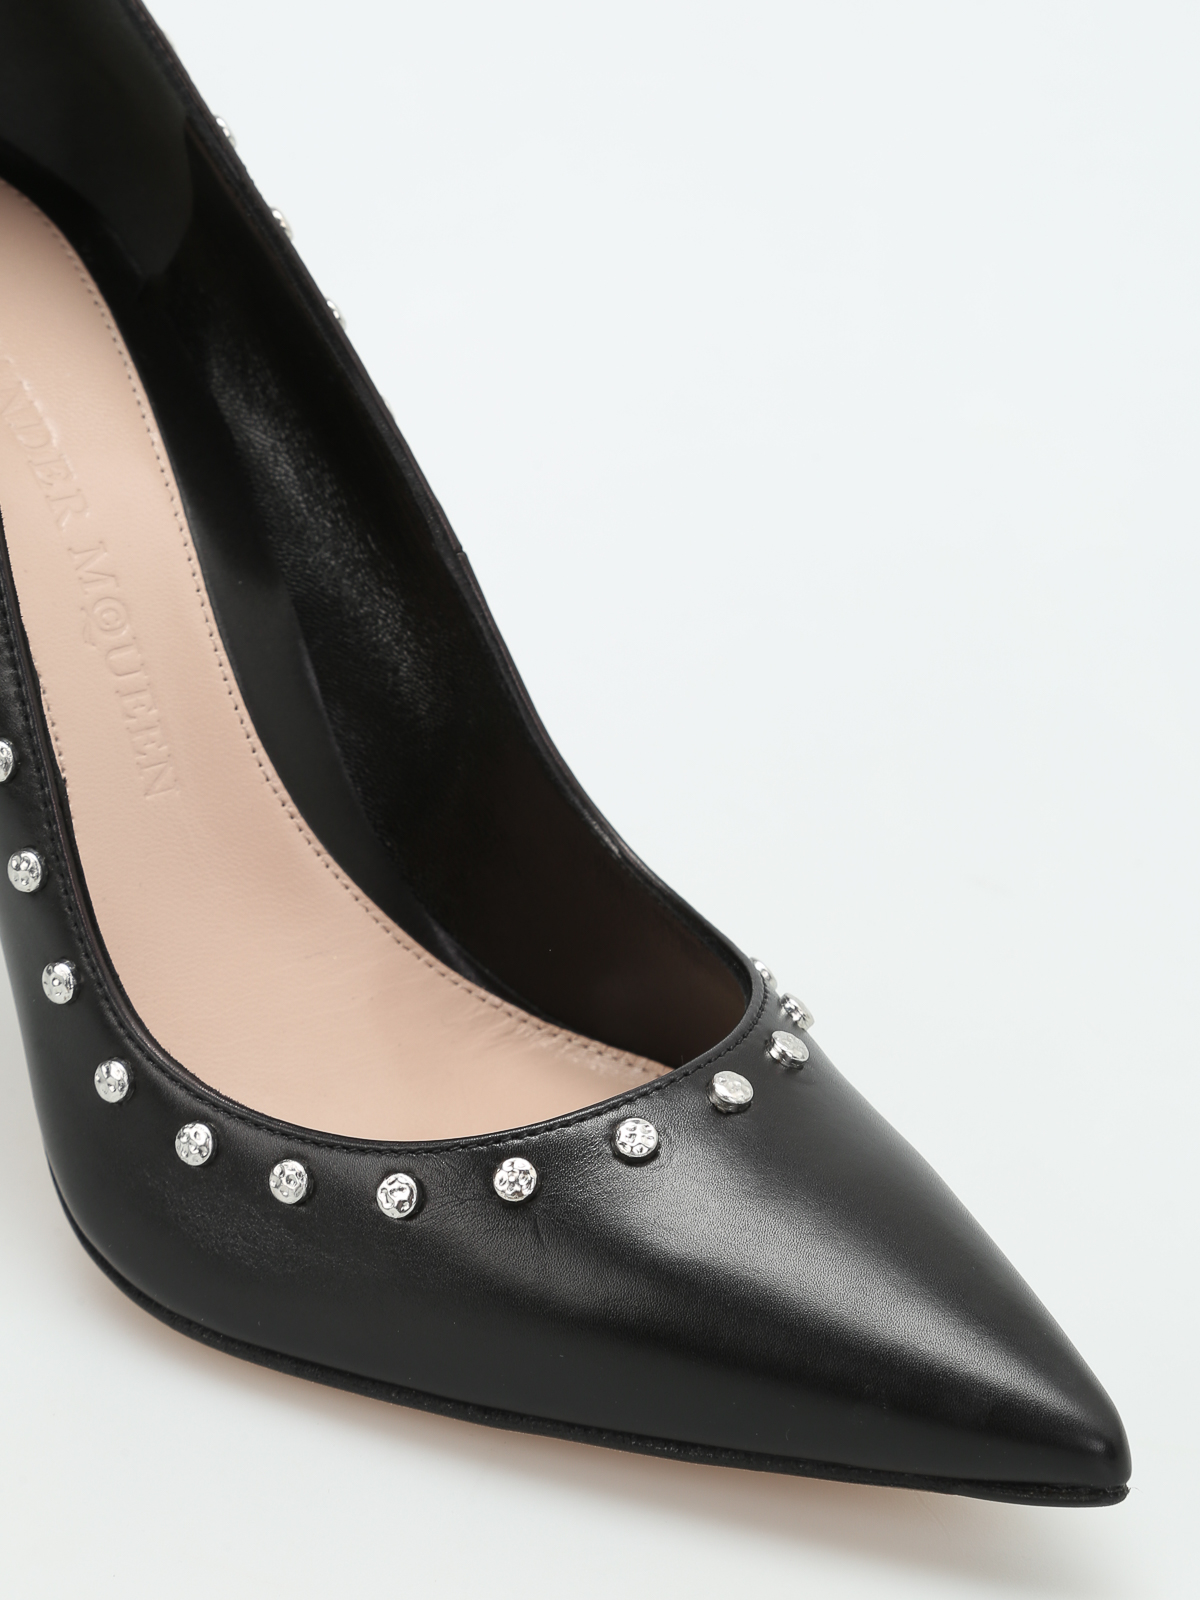 shoes Mcqueen - Studded leather pumps -